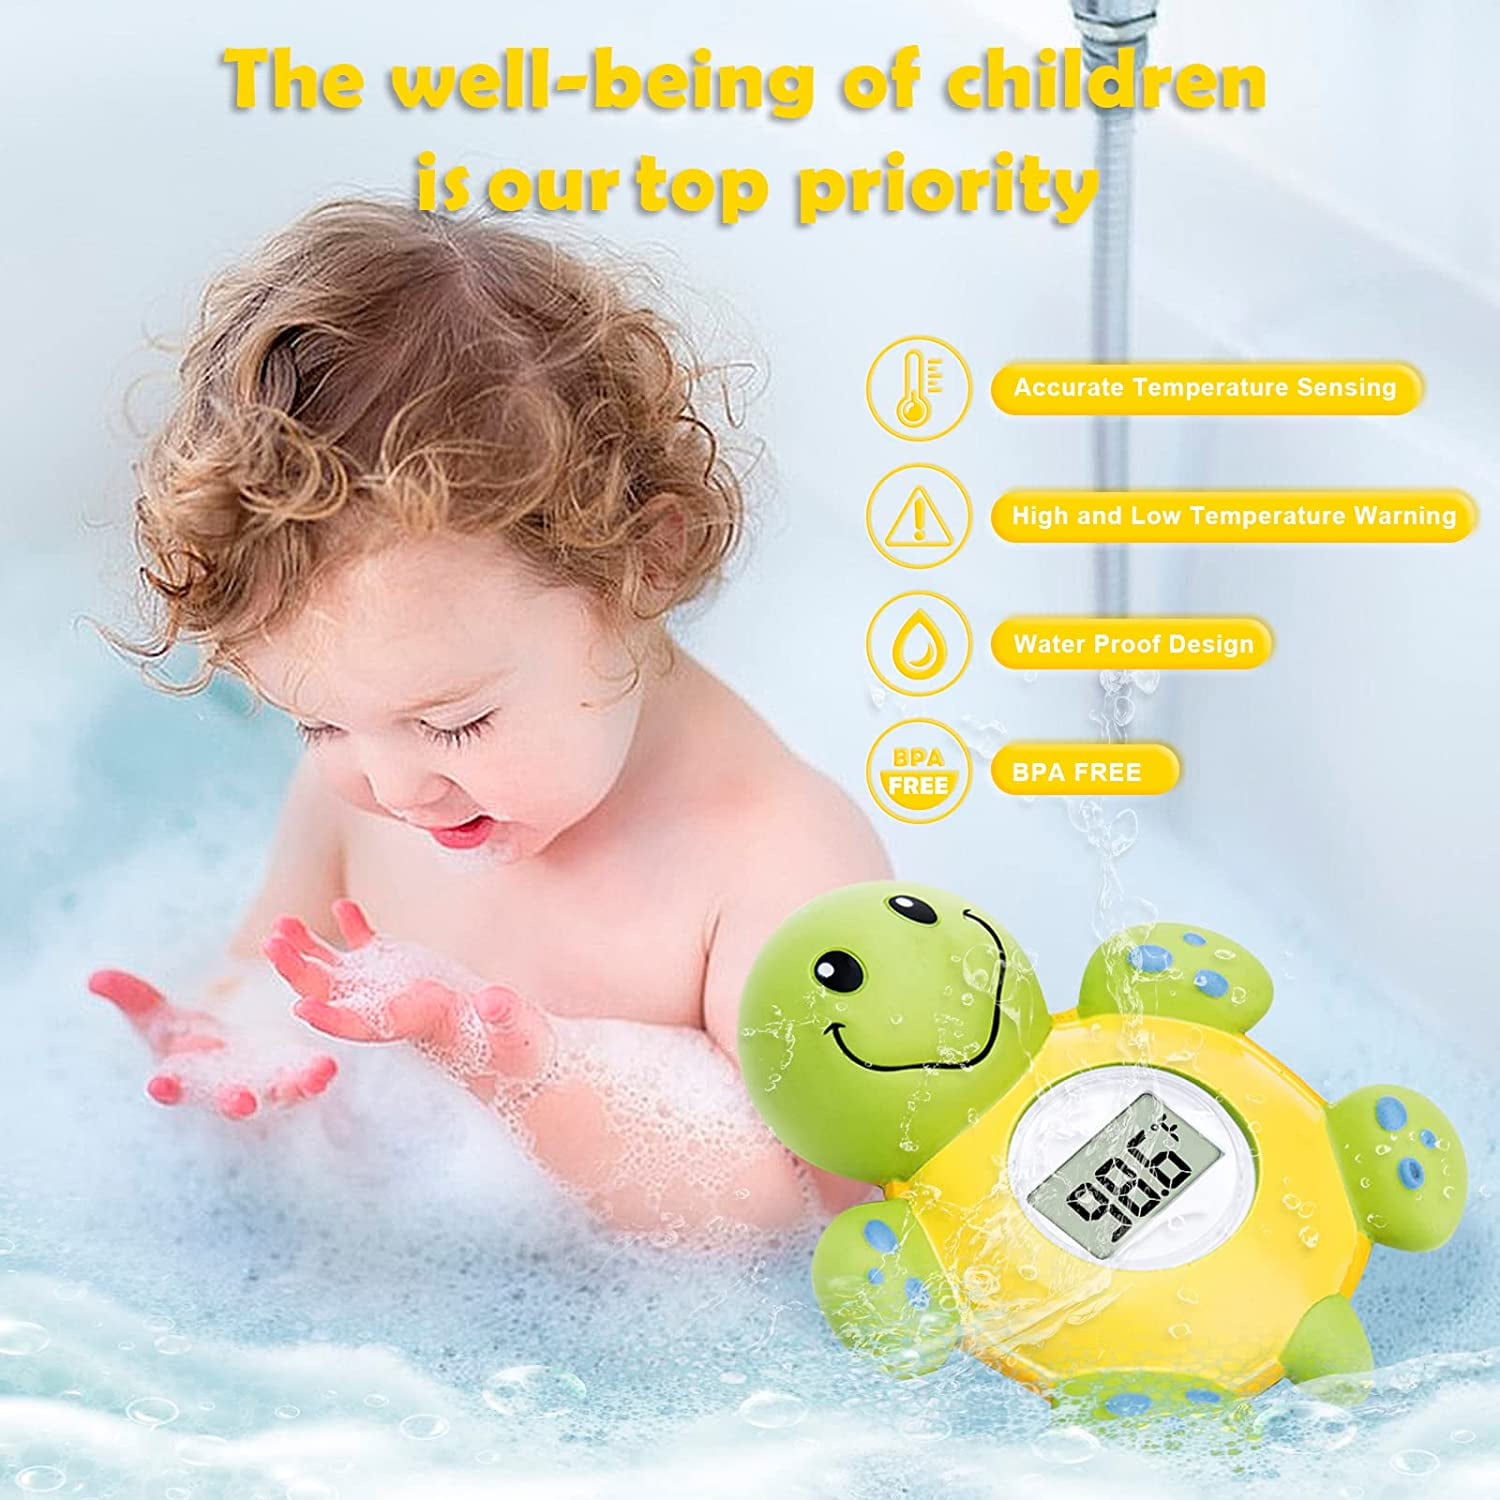 Baby Bath Thermometer with Room Thermometer - Famidoc FDTH-V0-22 New Upgraded Sensor Technology for Baby Health Bath Tub Thermometer Floating Toy